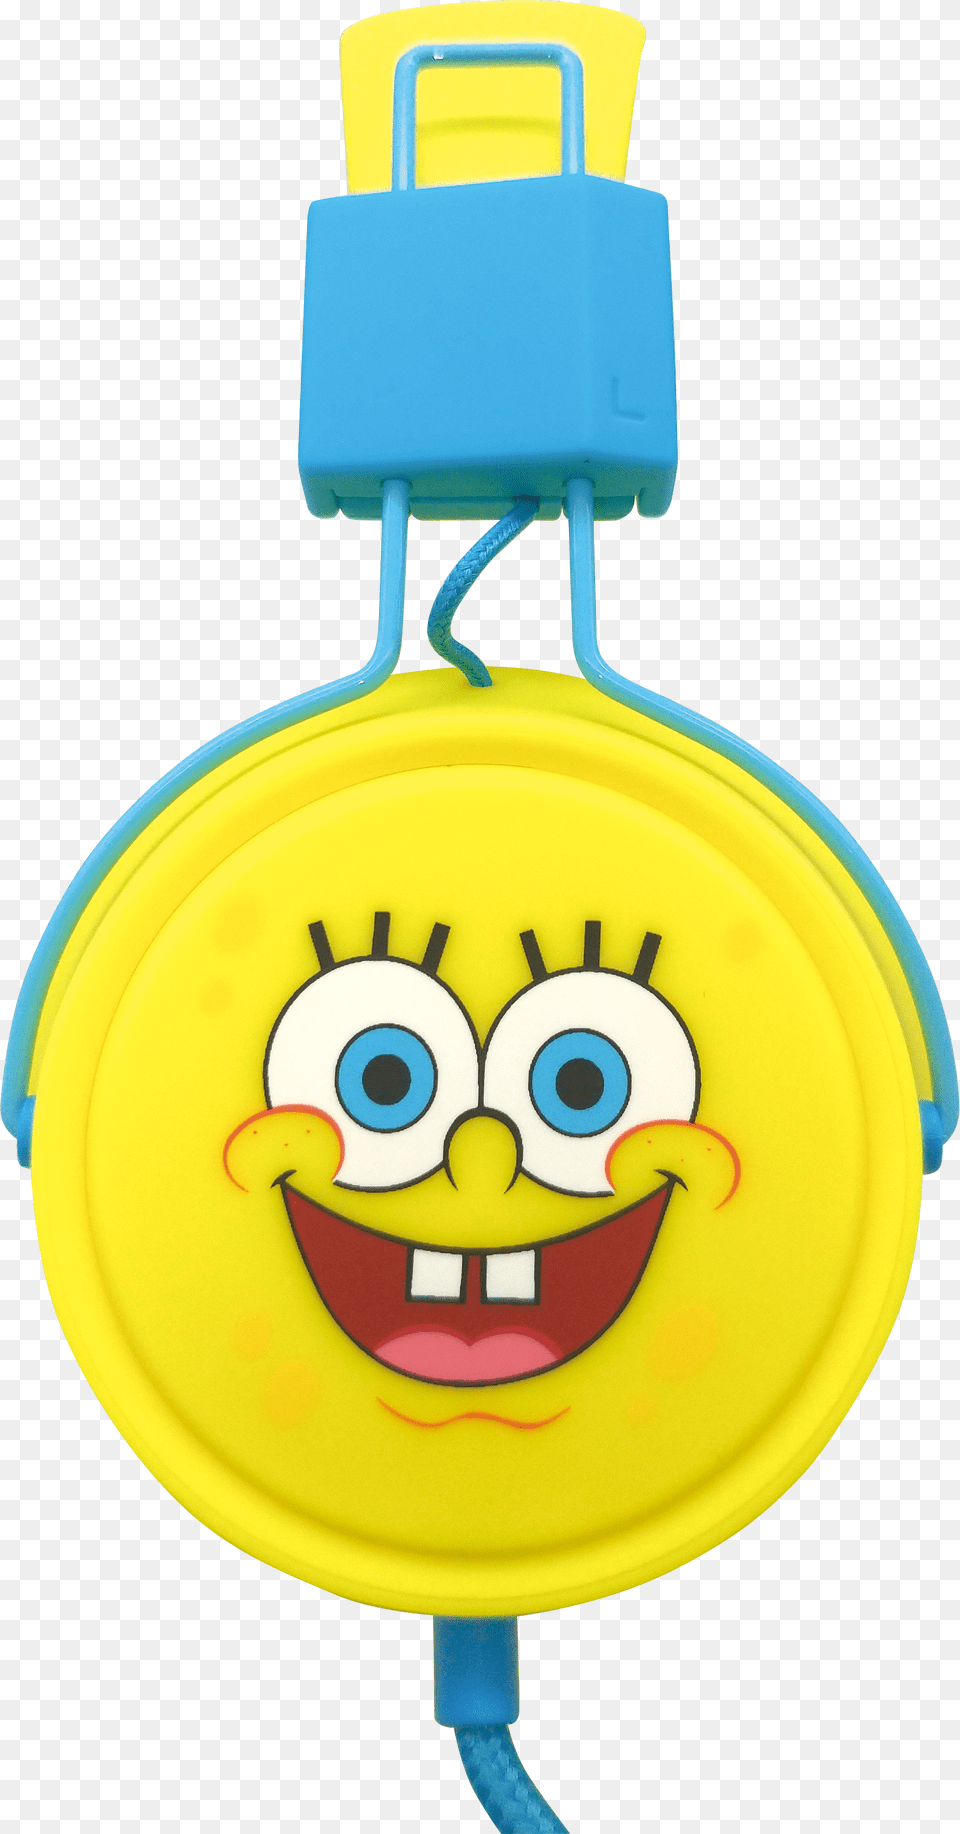 Smiley Free Transparent Png